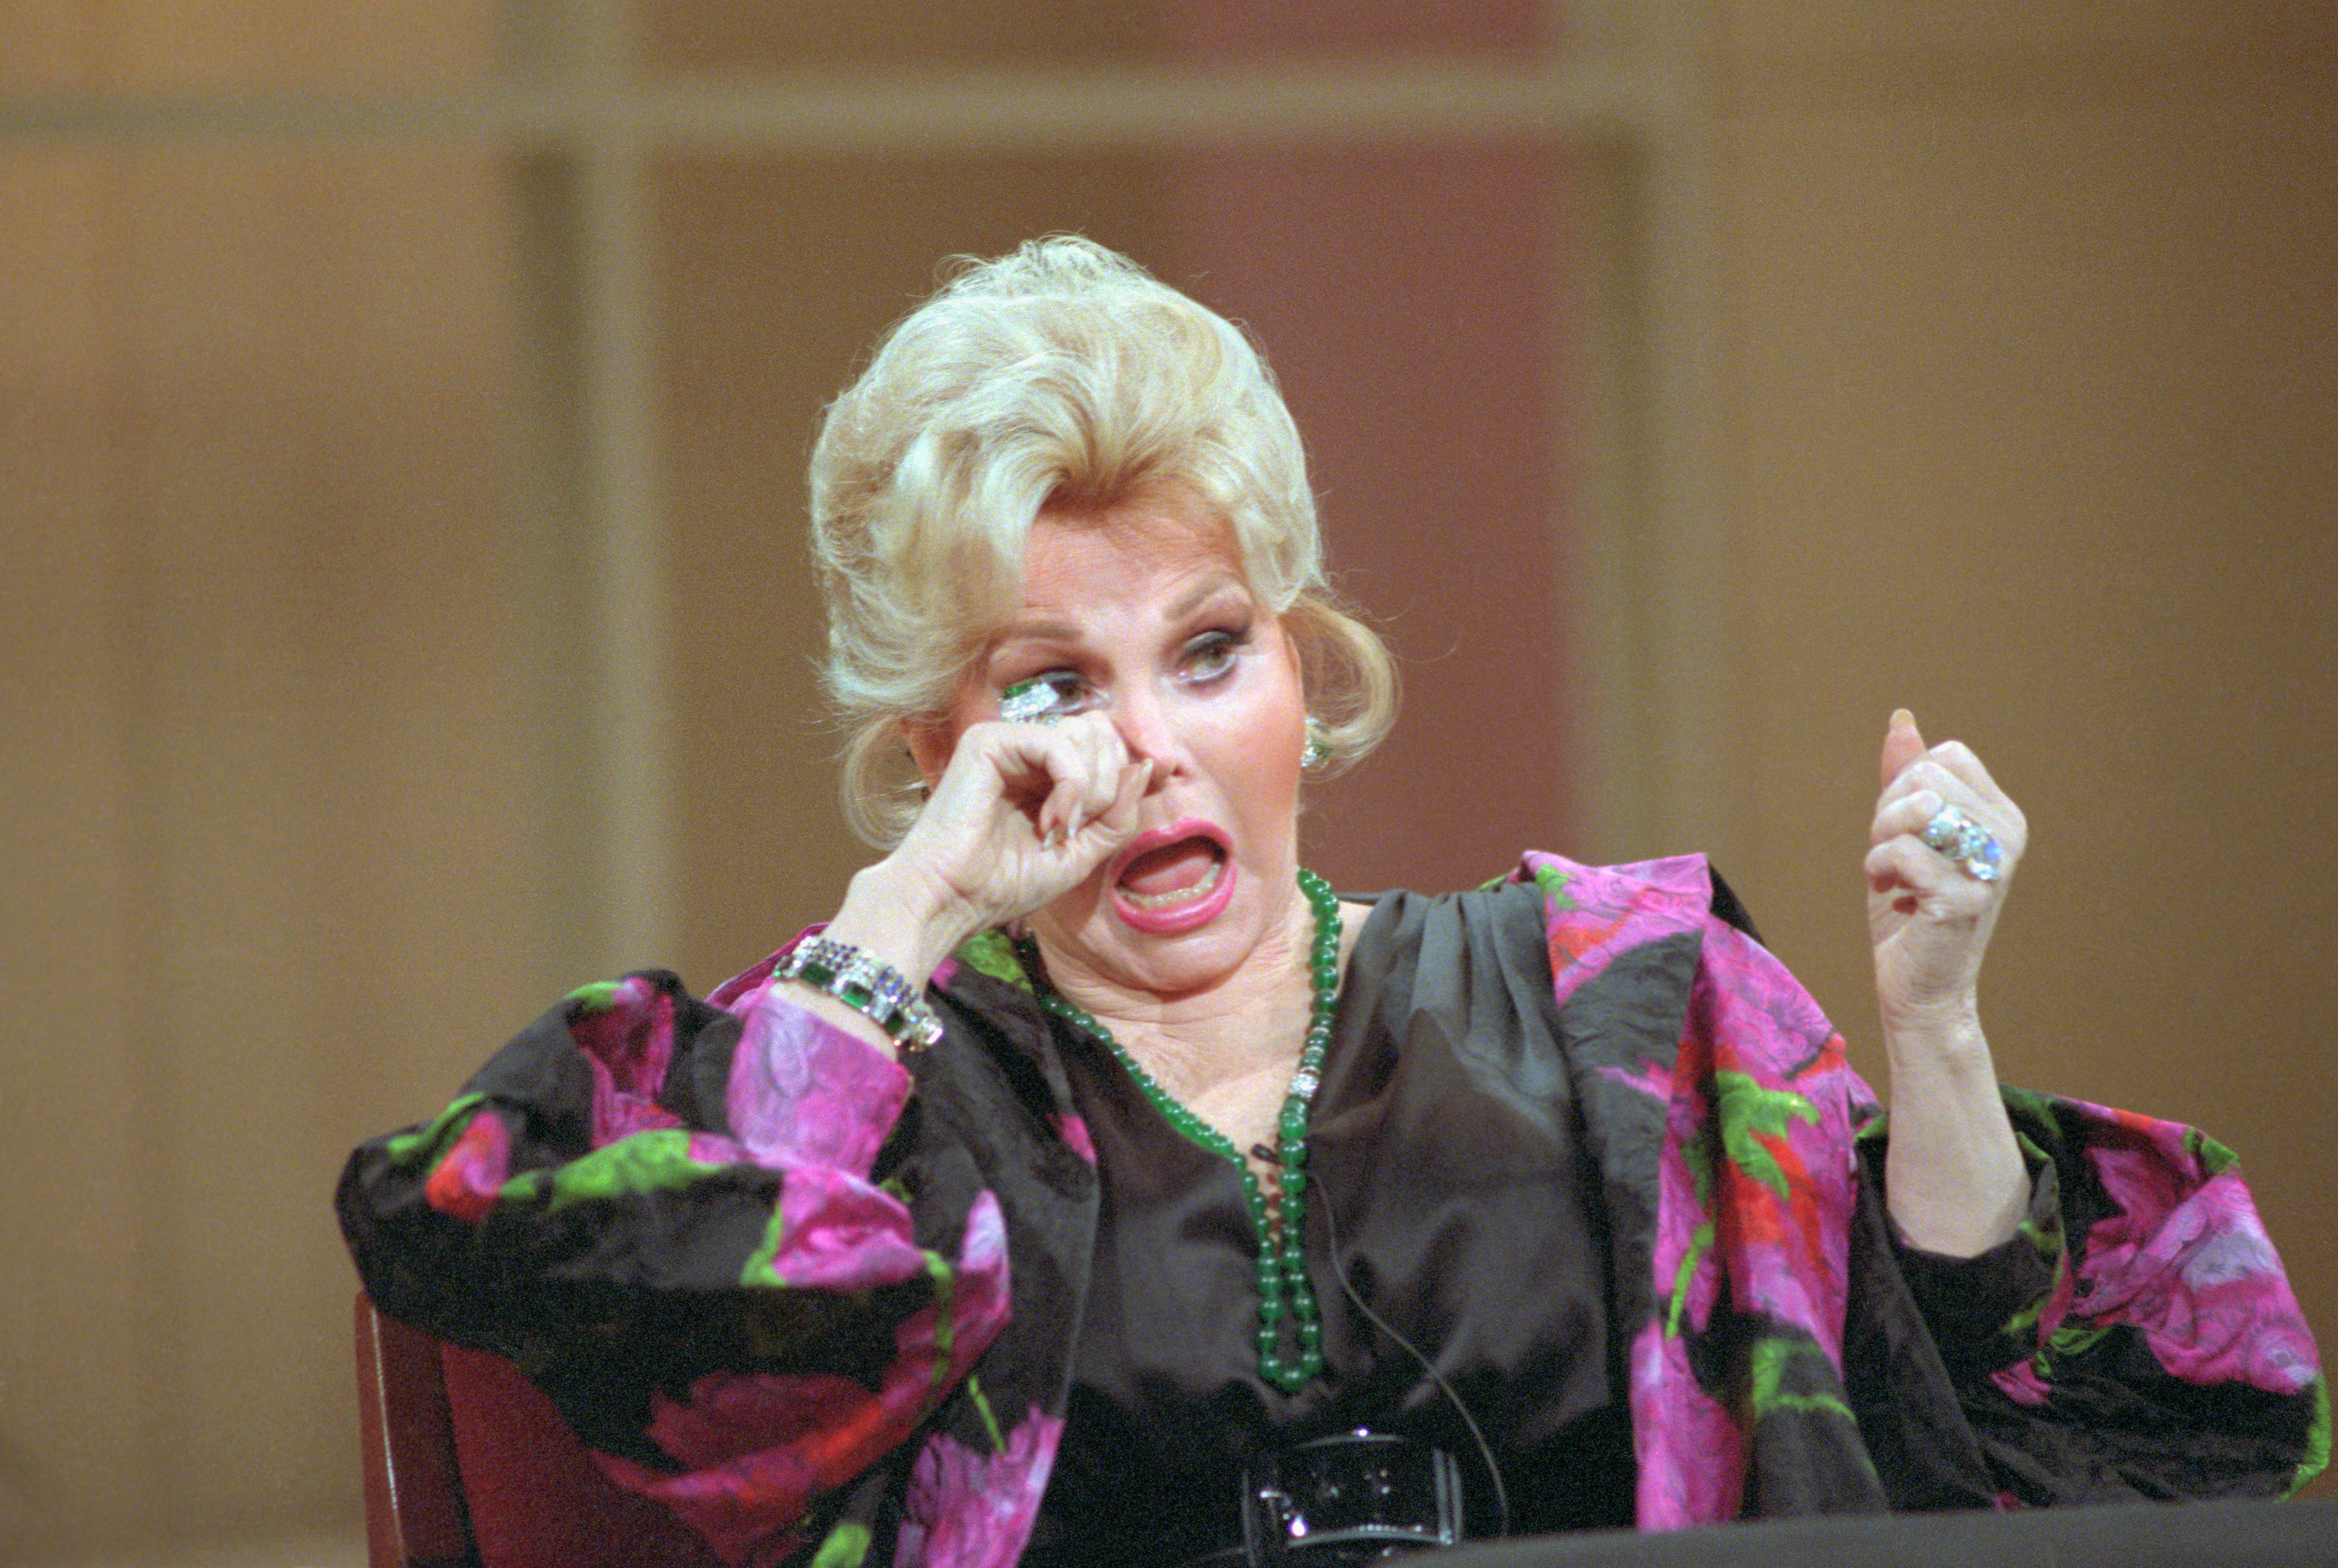 Zsa Zsa Gabor dabs at her eye as she appears on the Donahue Show